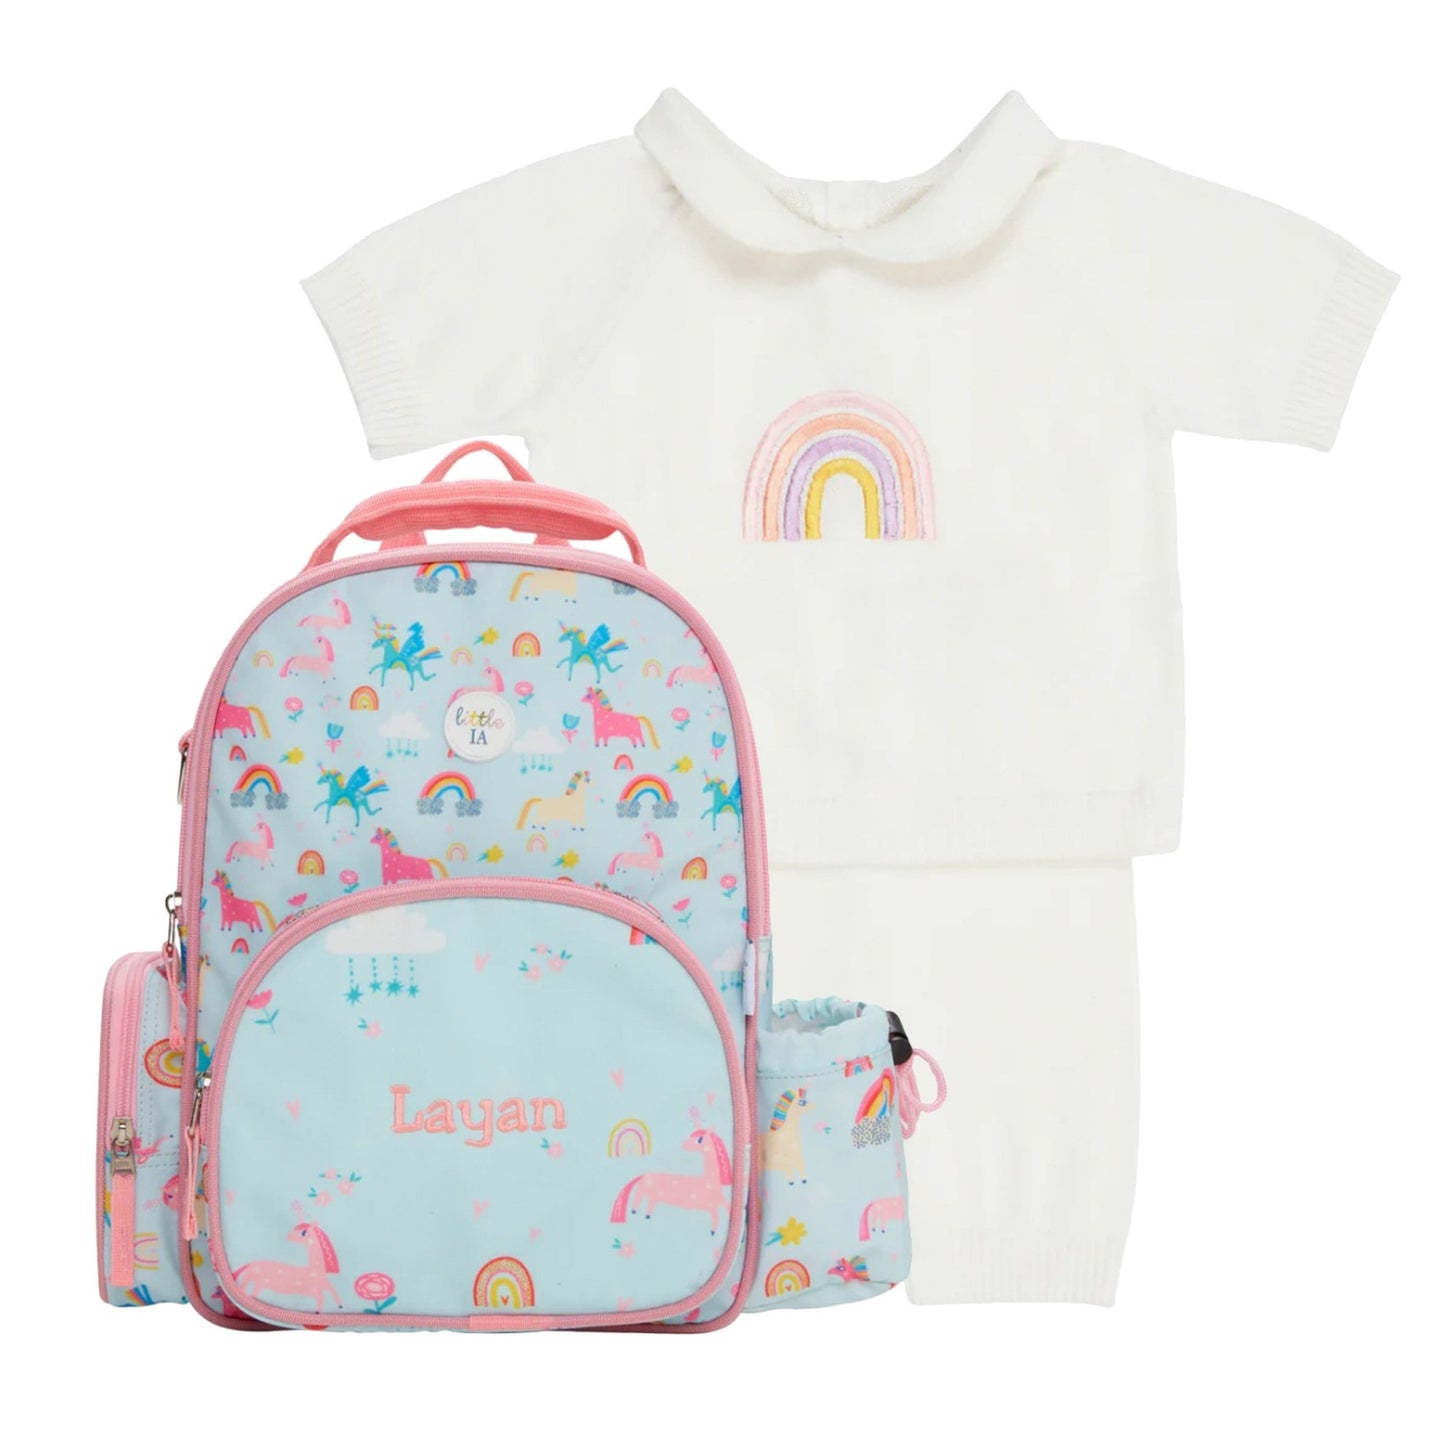 The Rainbow Toddler 3-Piece Gift Set